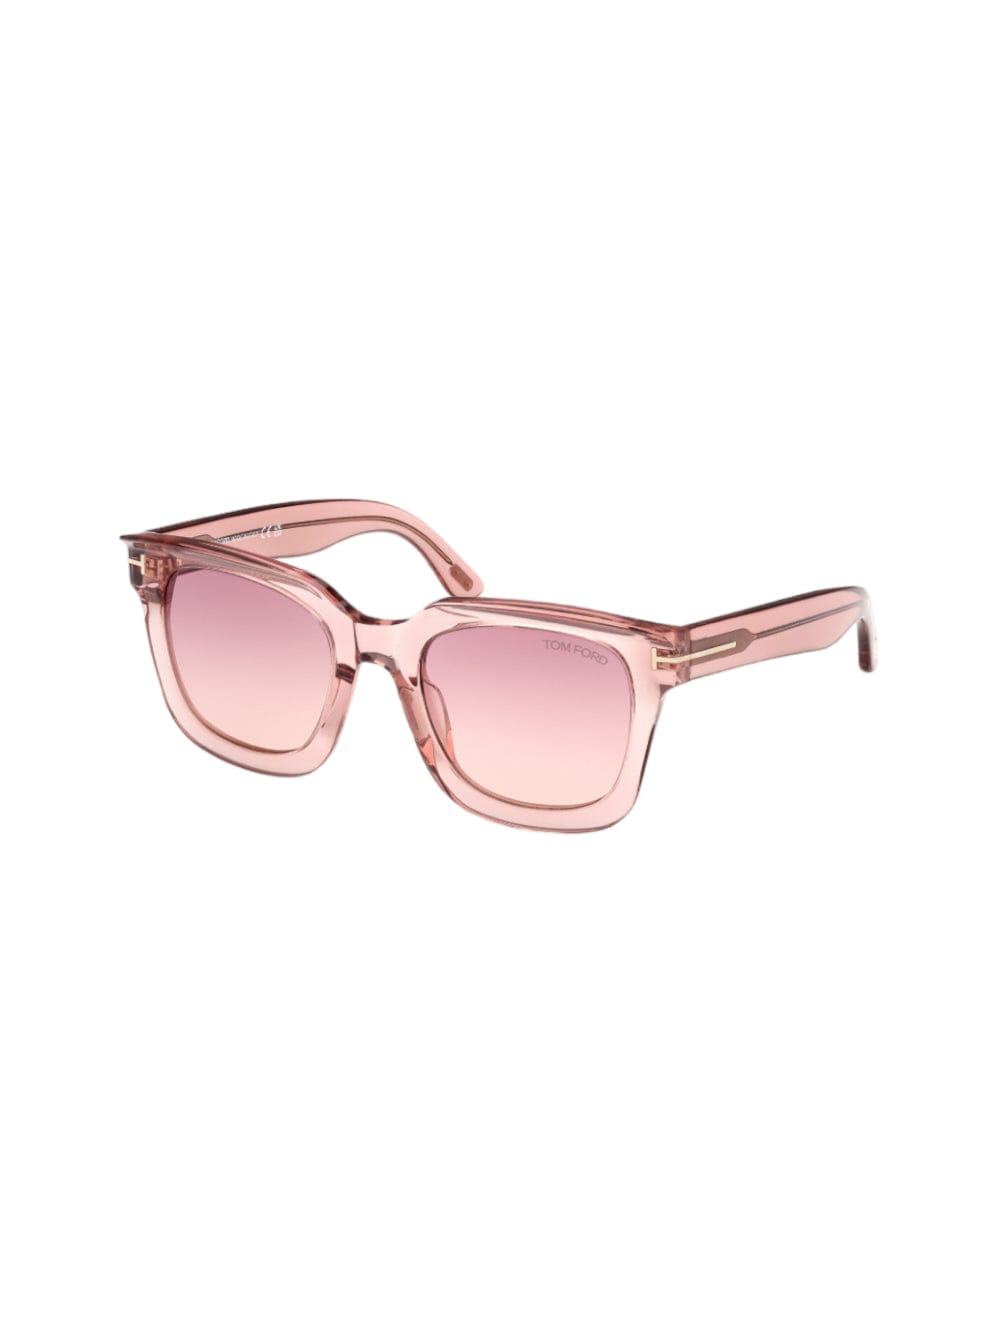 Ft 1115 /s - Crystal Pink Sunglasses